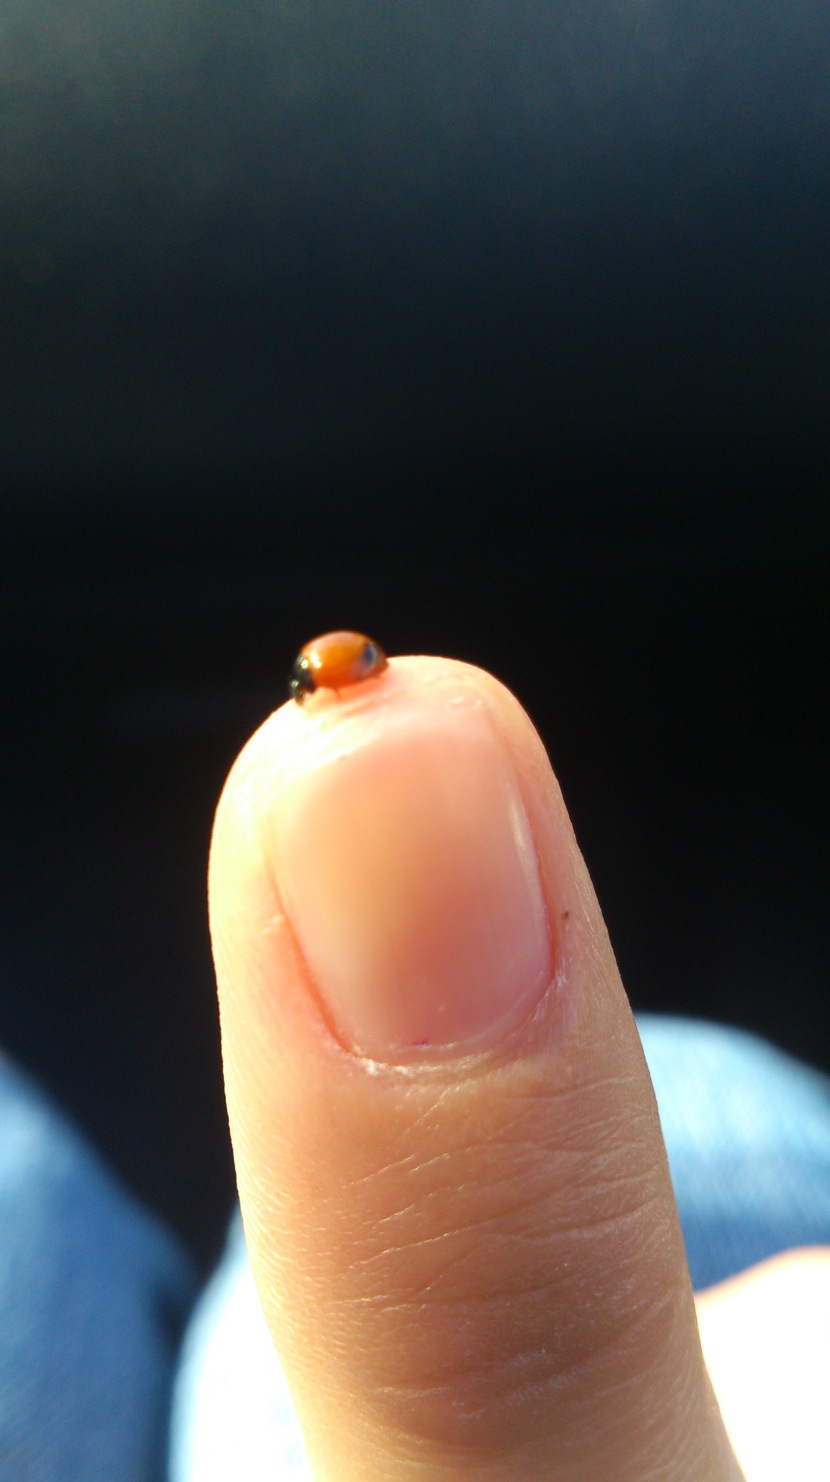 A ladybug that strolled up and down my hand, after we left my granpa's house